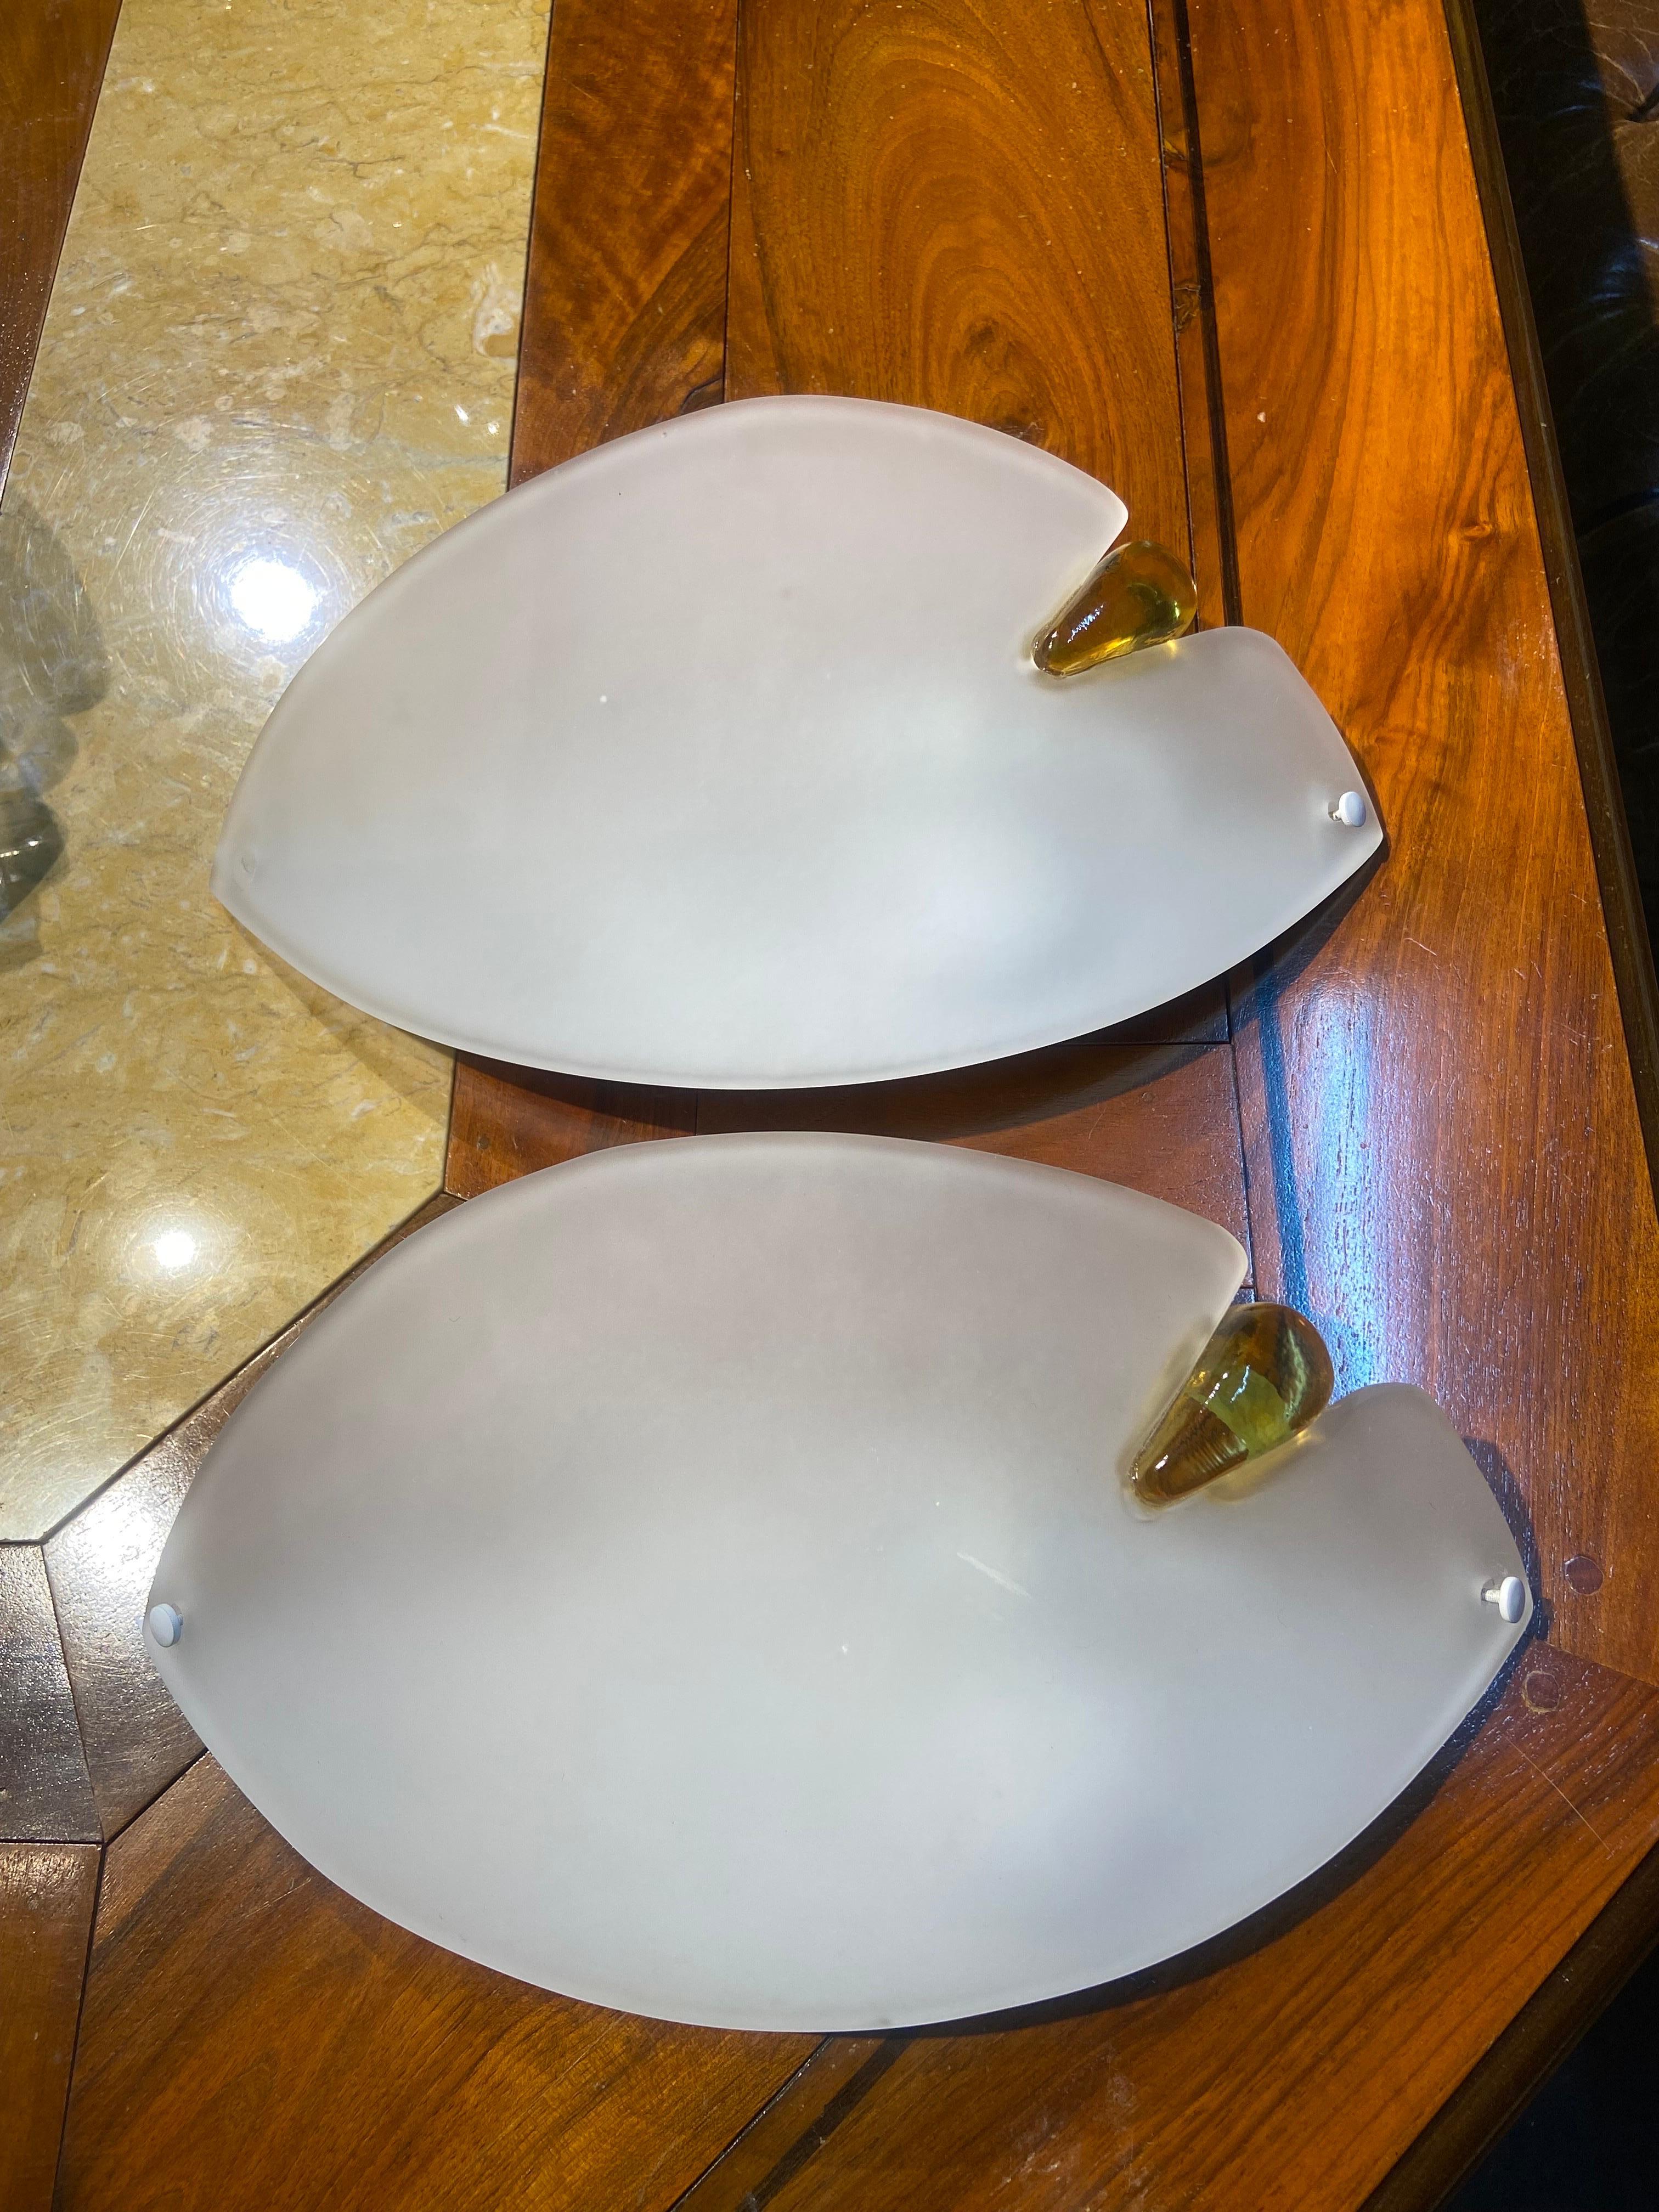 Two Italian modern wall lamps AV Mazzega made of hand-crafted Murano glass with satin finish in eye shape with yellow side decoration.
Founded in 1946 by Gianni Bruno Mazzega, the company AVMazzega brings centuries of experience and craftsmanship,